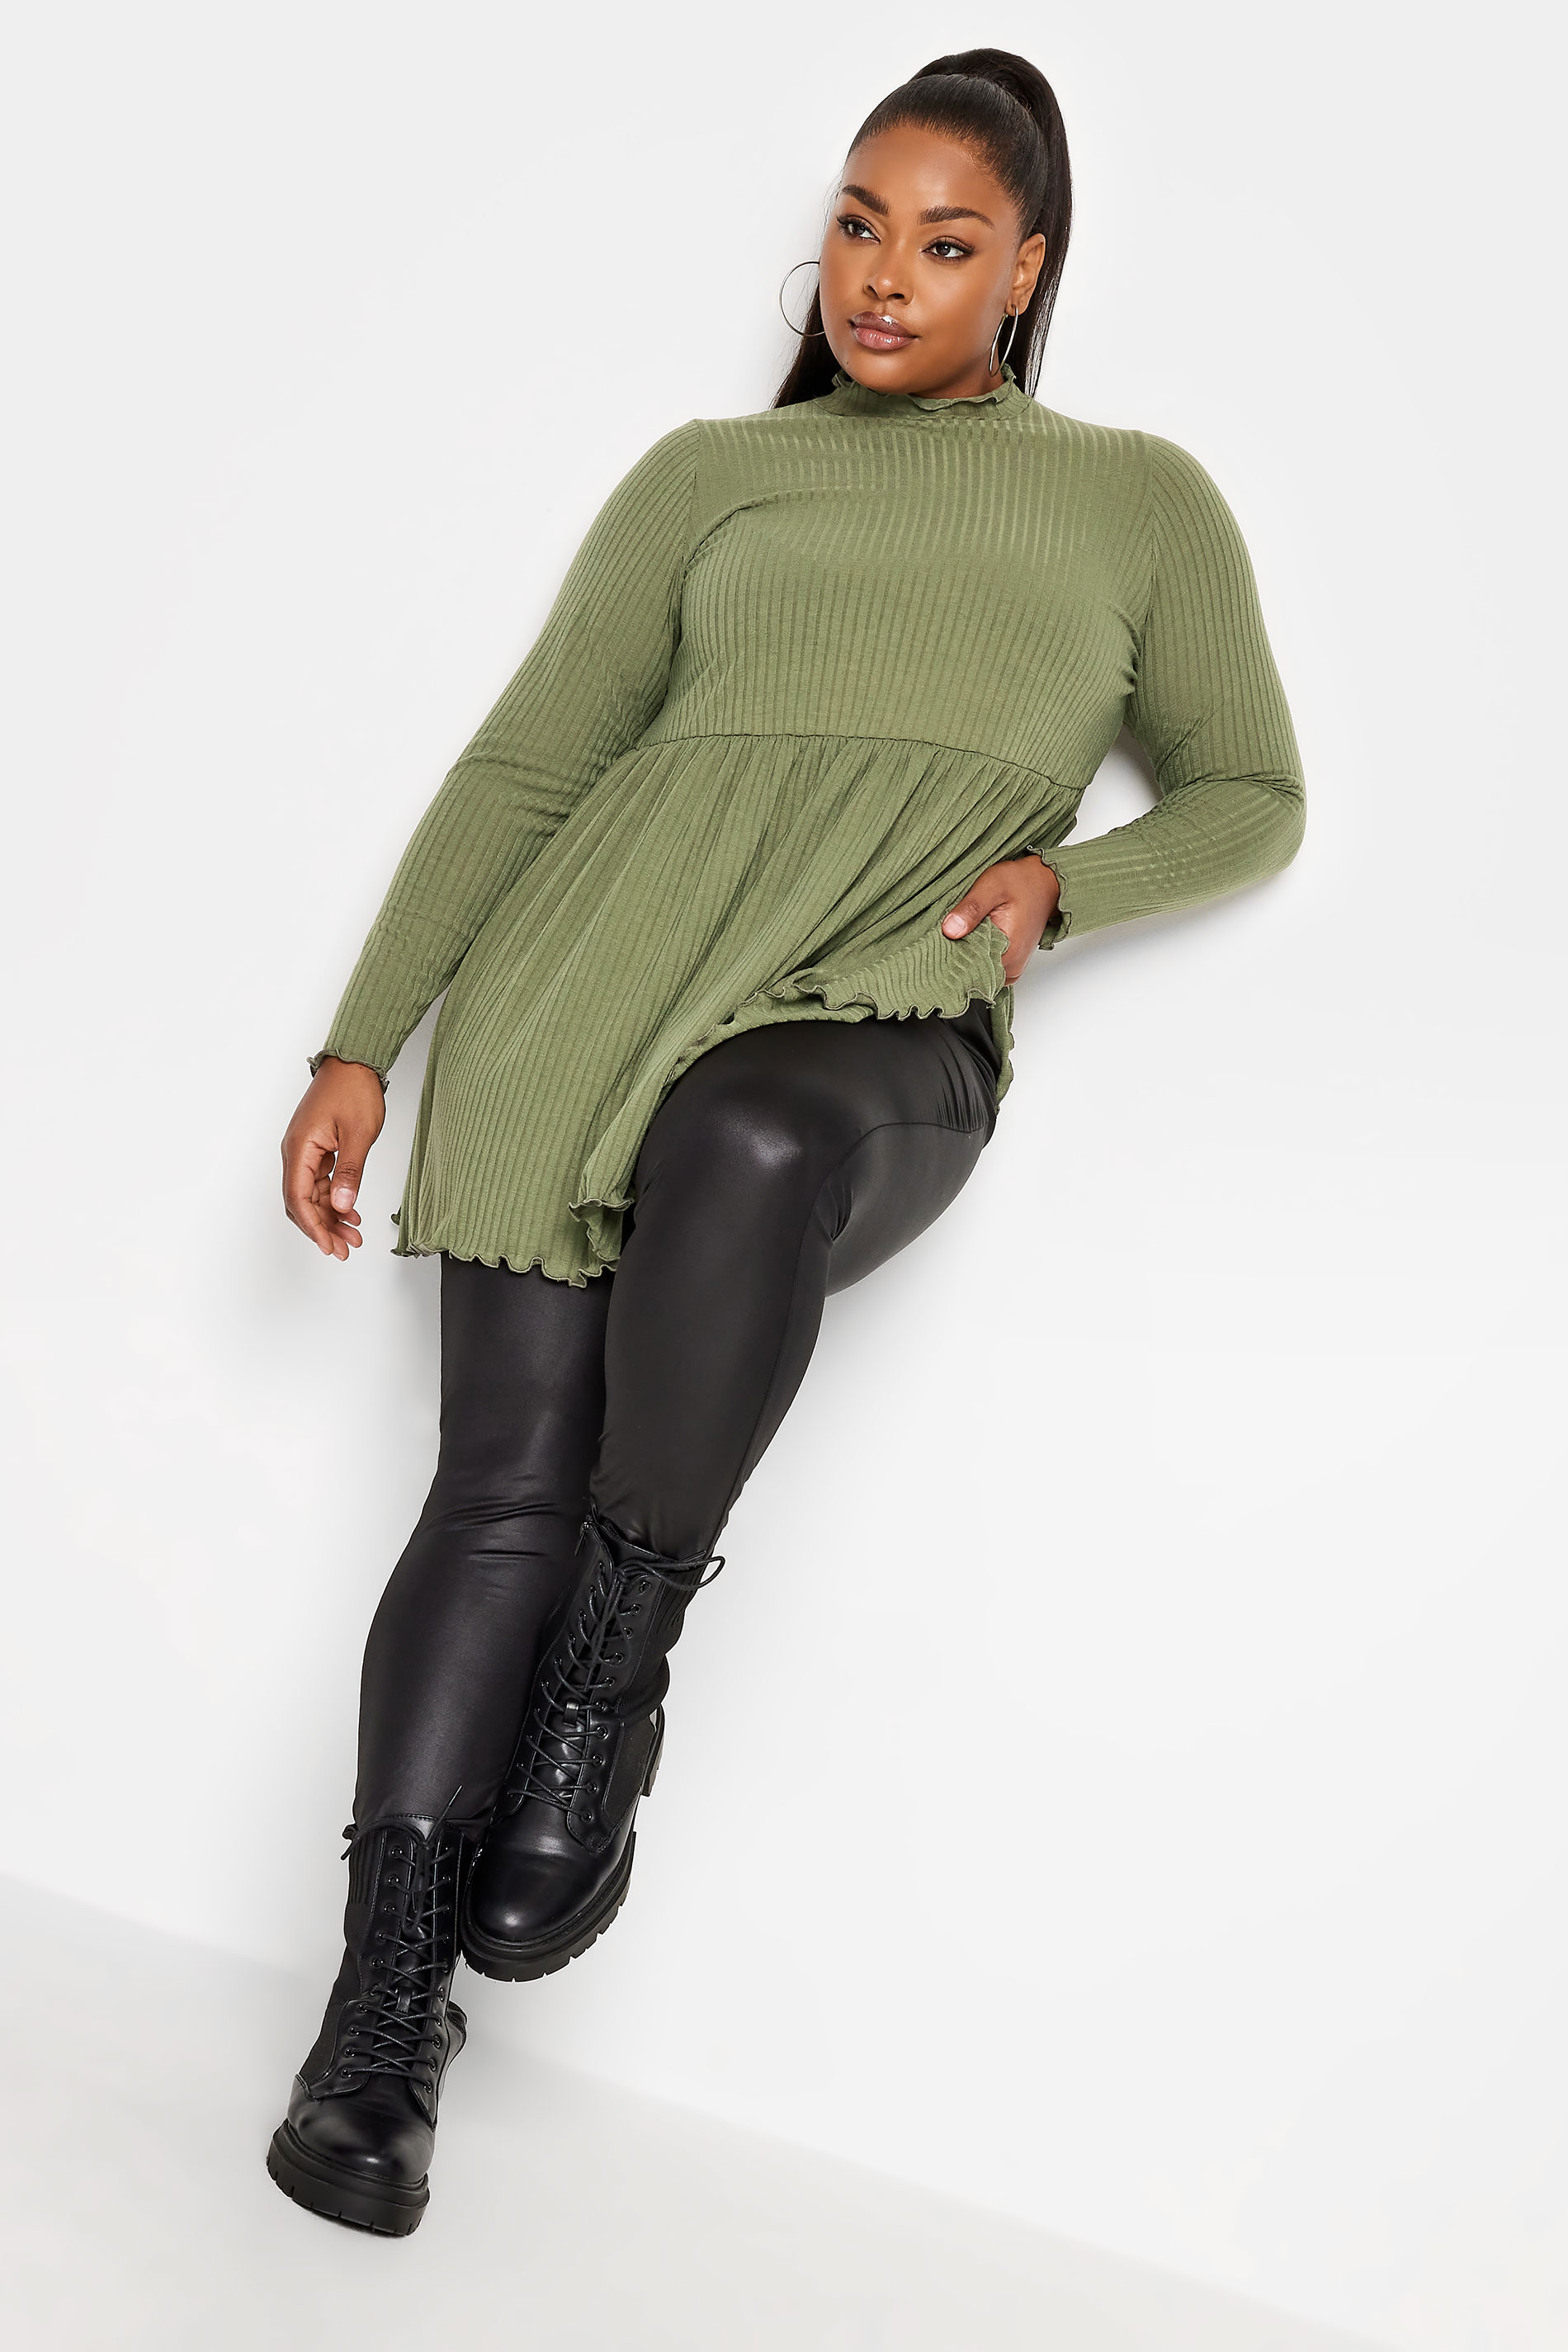 LIMITED COLLECTION Plus Size Khaki Green Peplum Lettuce Hem Top | Yours Clothing   3